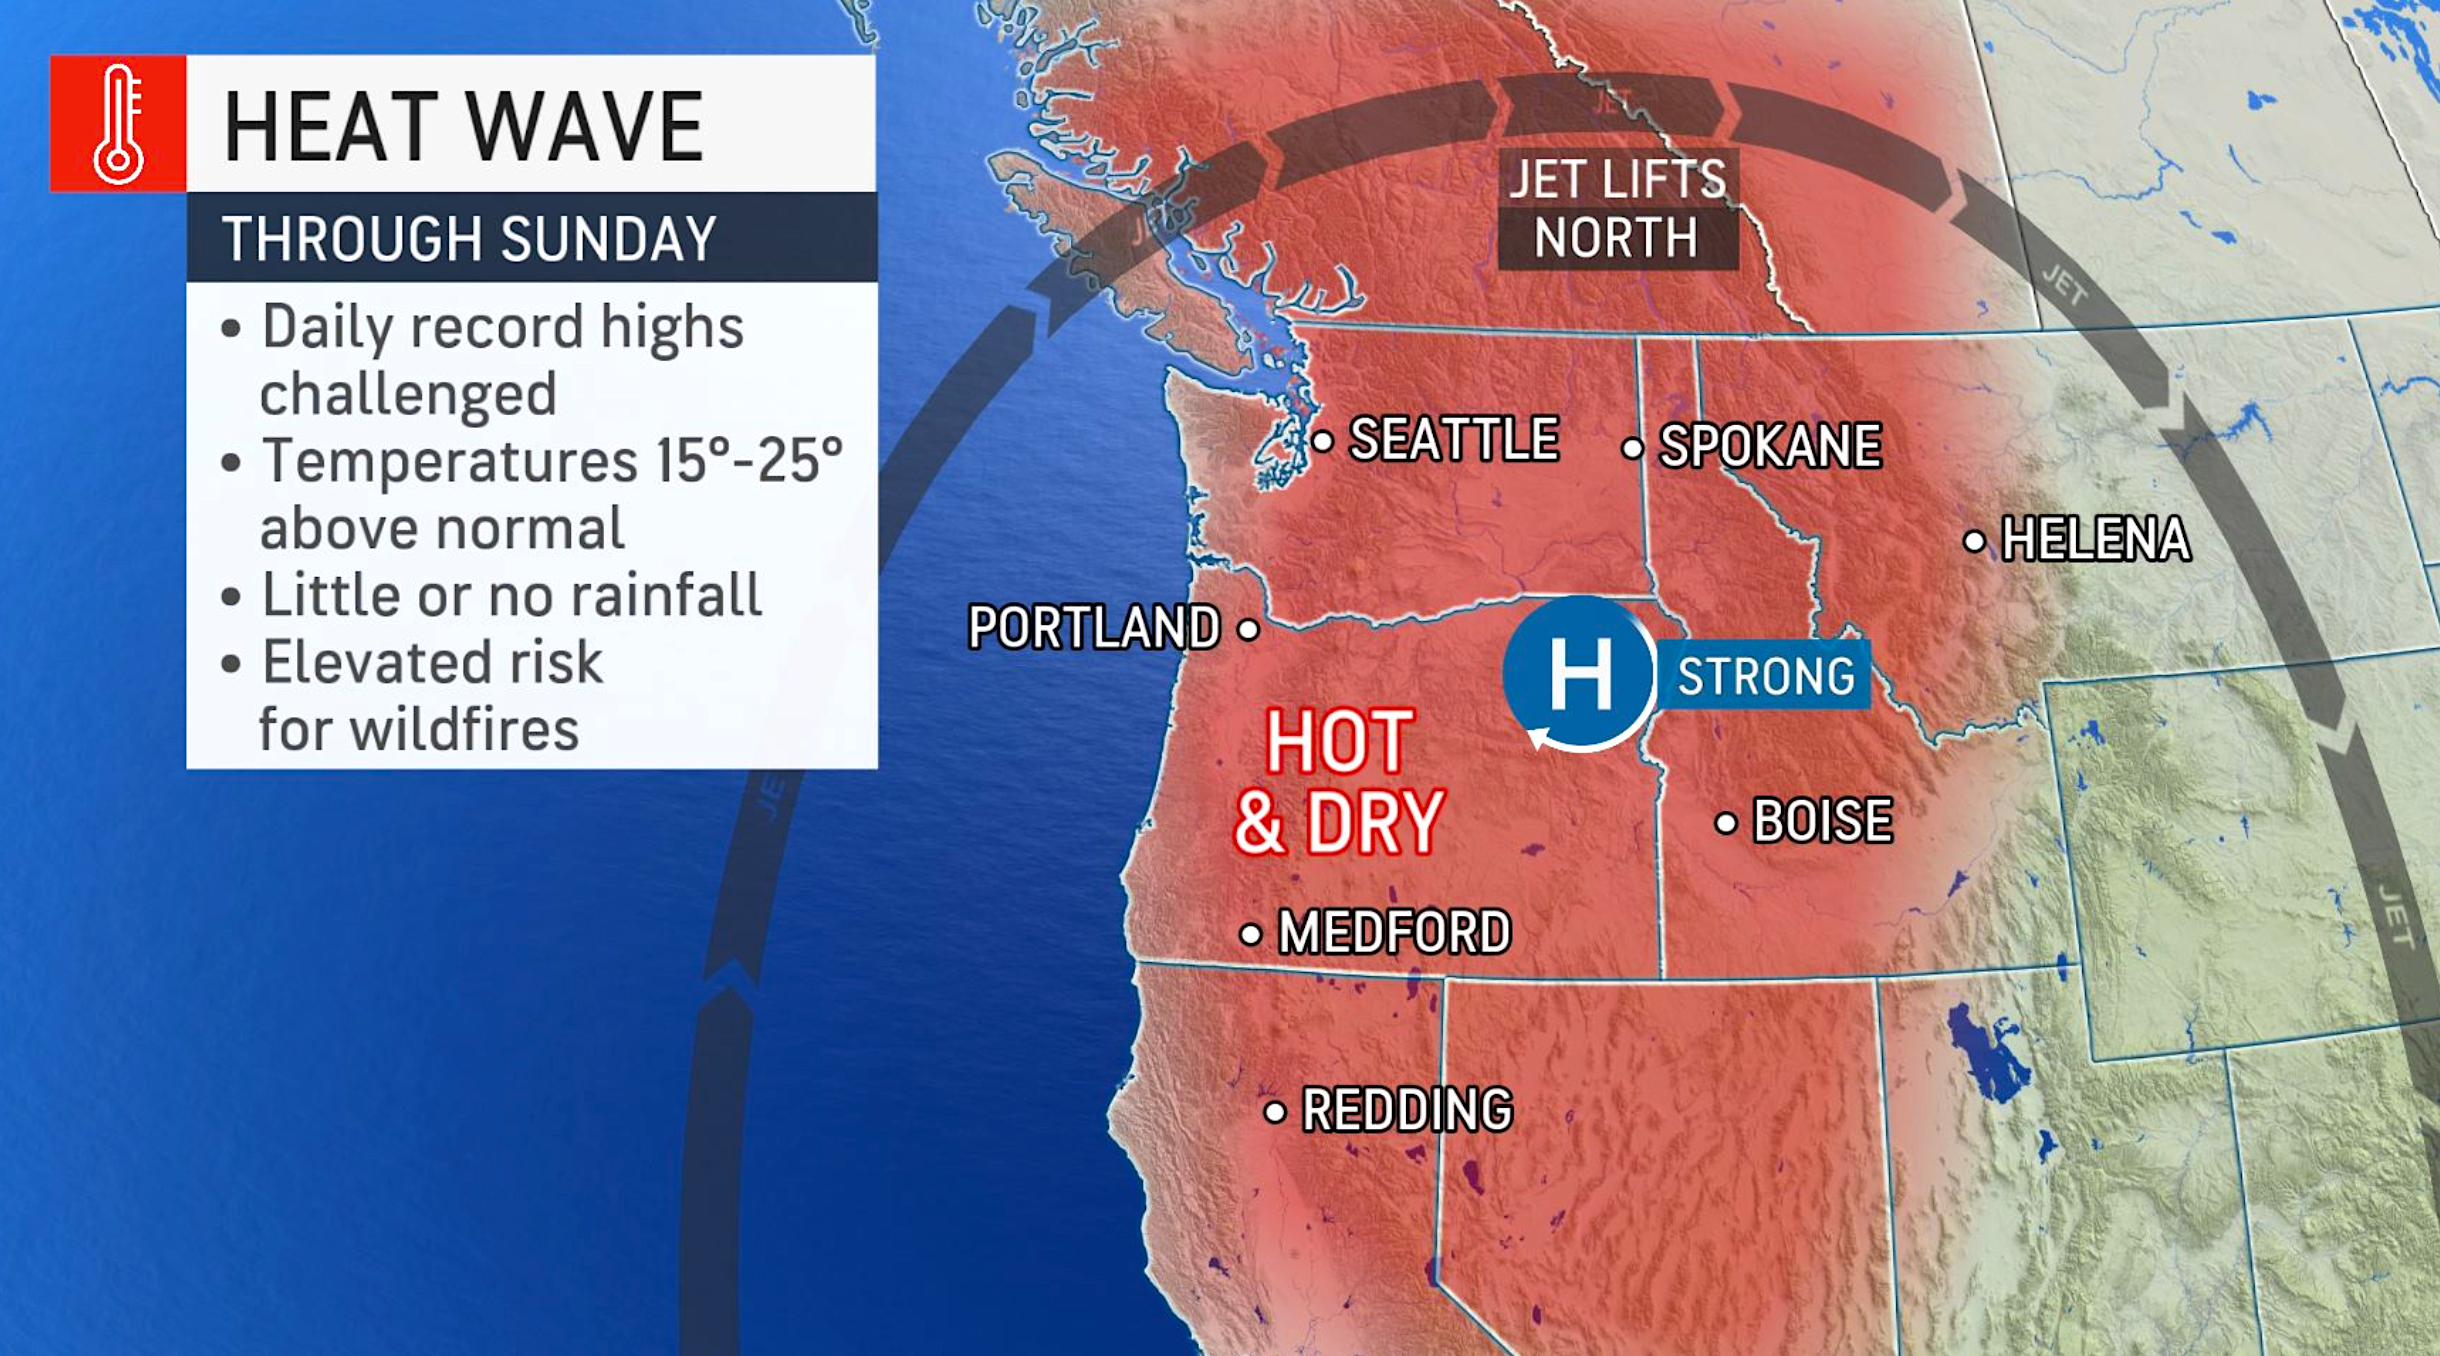 Weekend Forecast: The Pacific Northwest will Experience More Heat